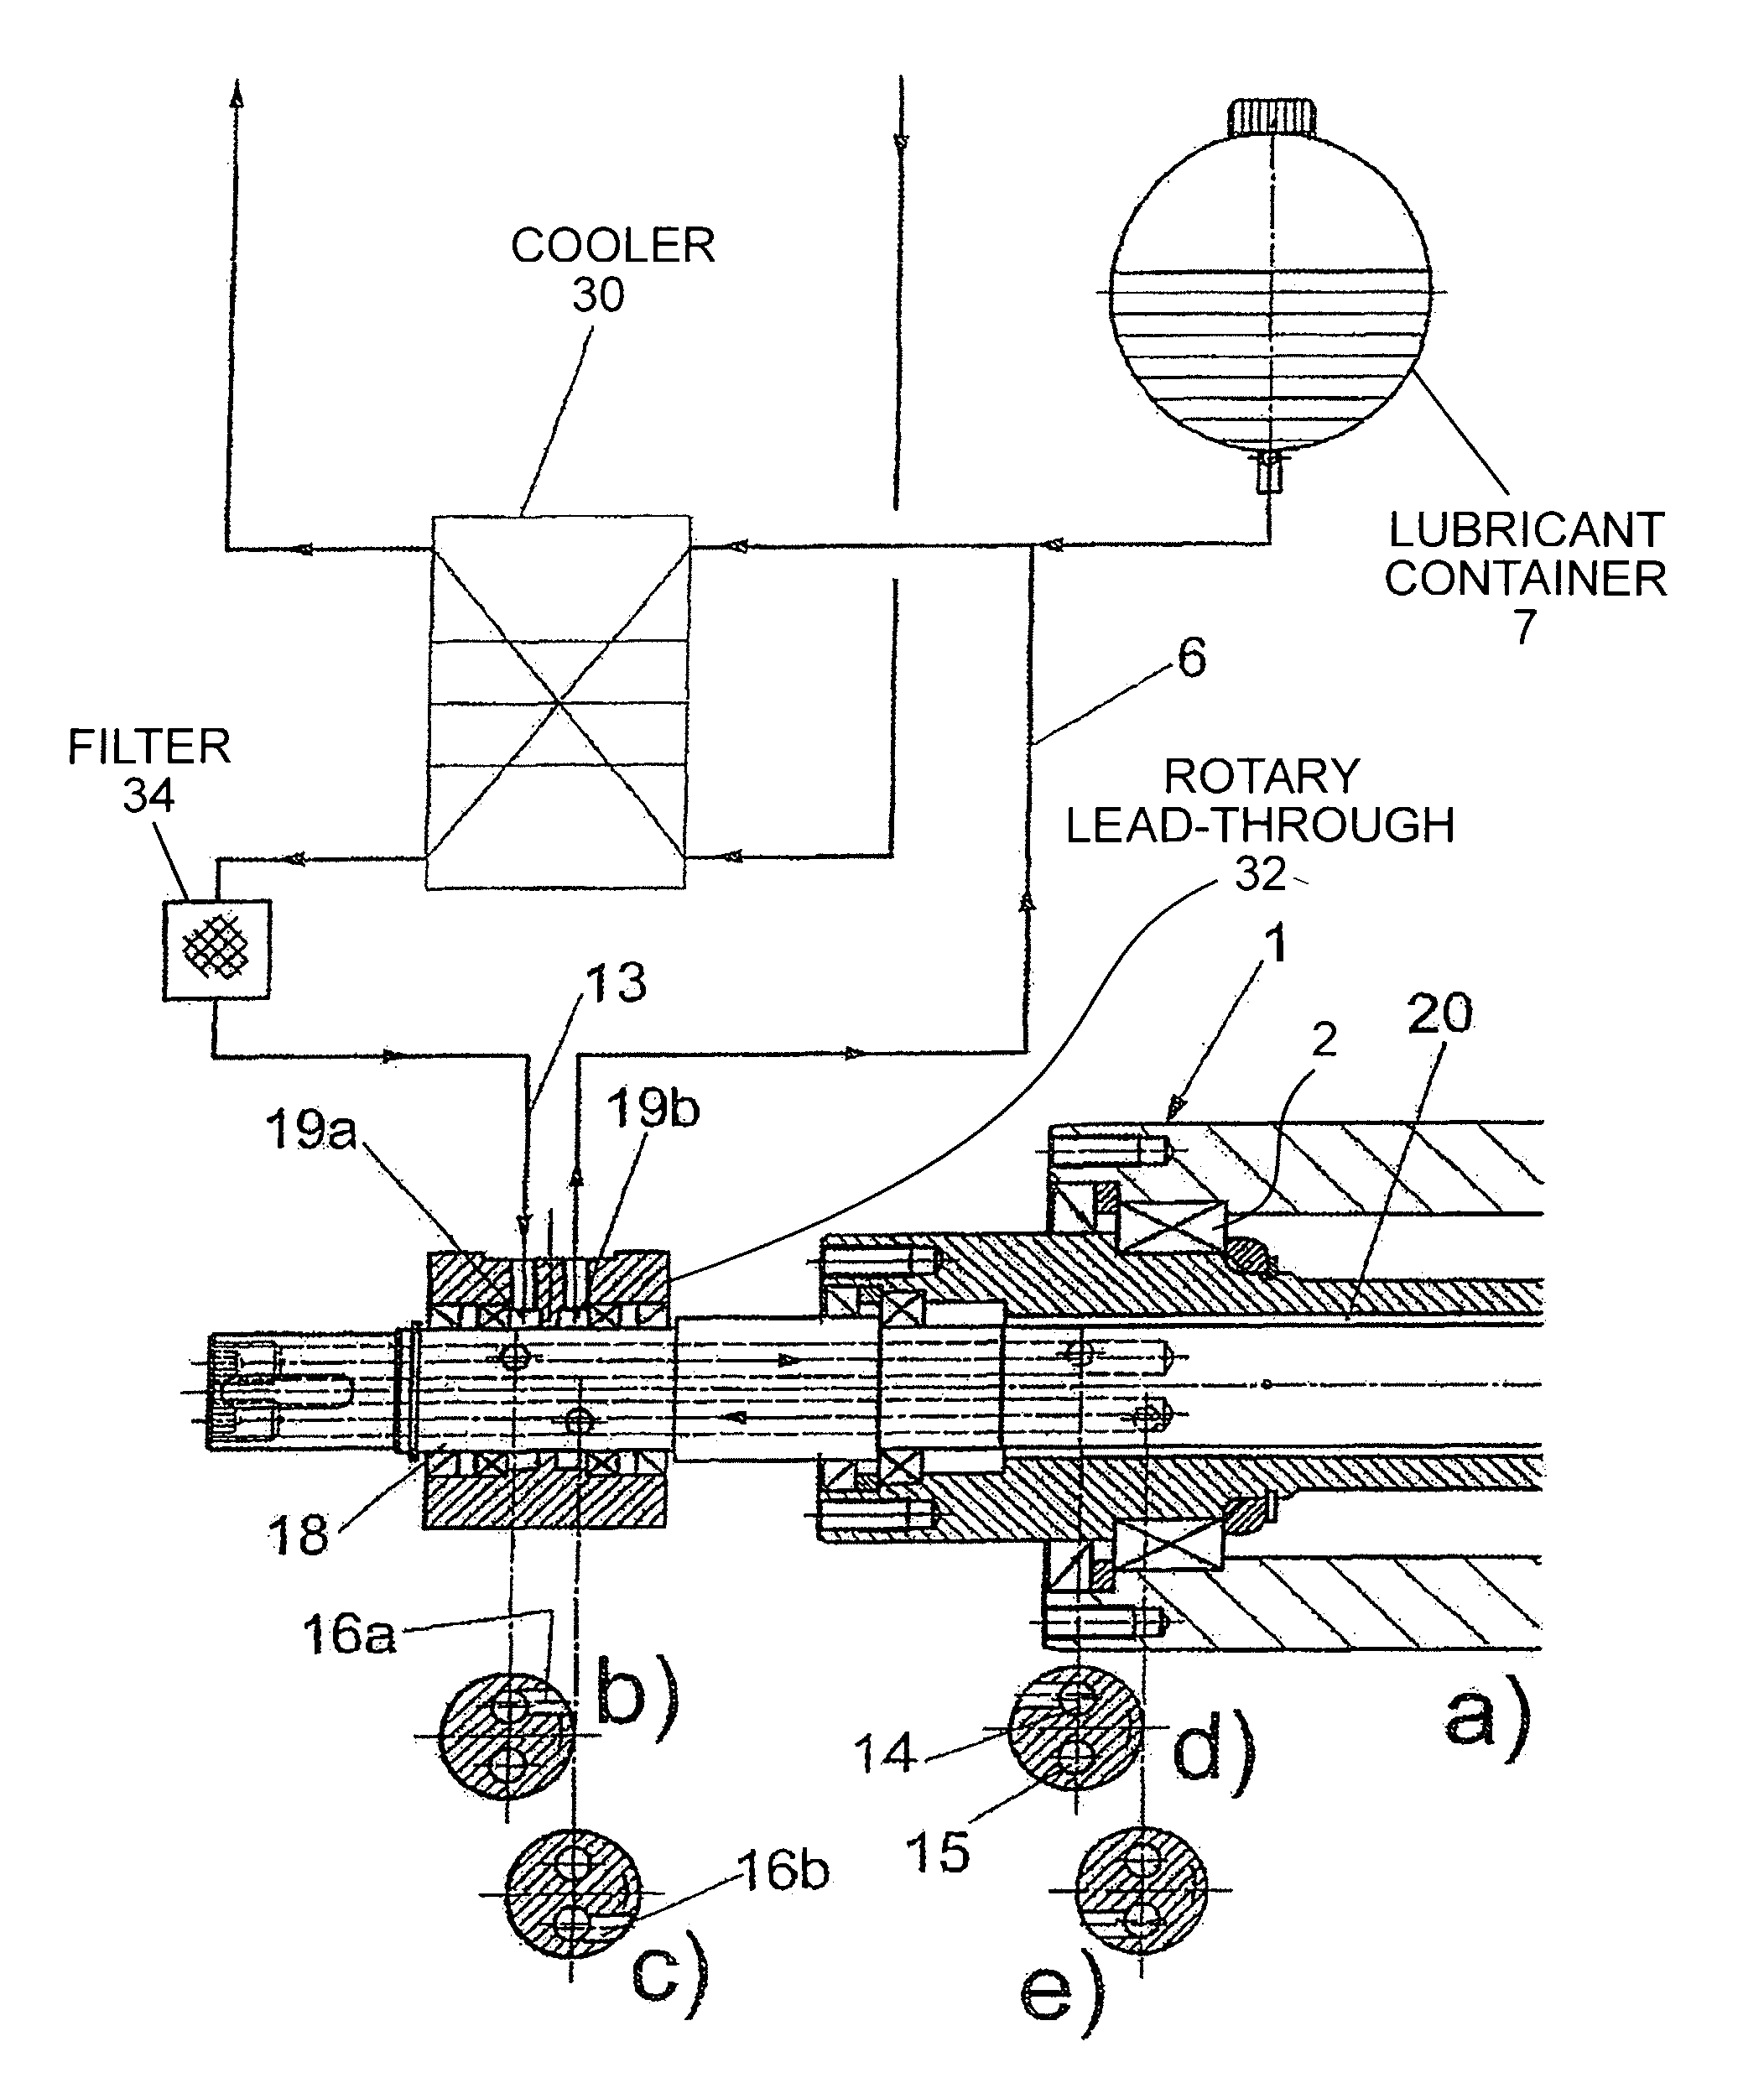 Gear apparatus for a centrifuge including a drive shaft having two hollow longitudinal channels for lubricating the gear apparatus via an associated lubricant compensating system